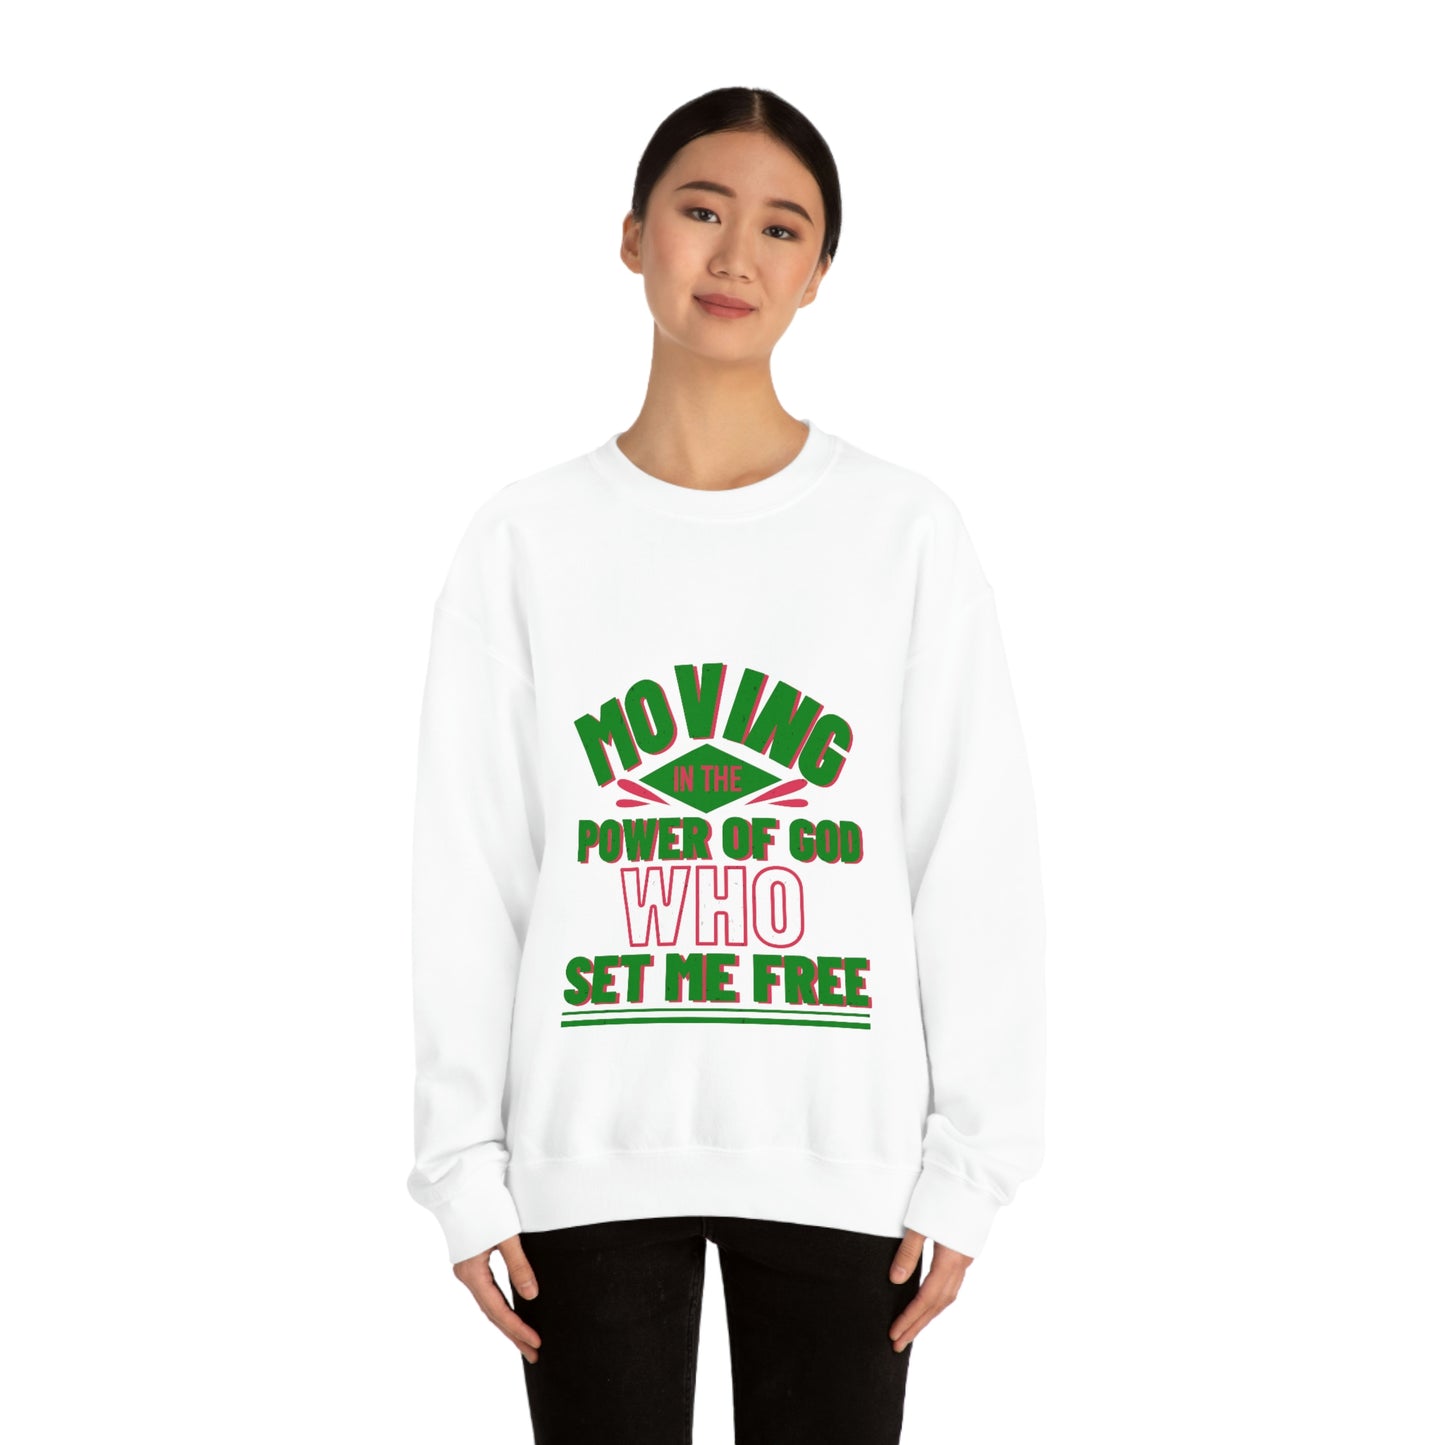 Moving In The Power Of God Who Set Me Free Unisex Heavy Blend™ Crewneck Sweatshirt